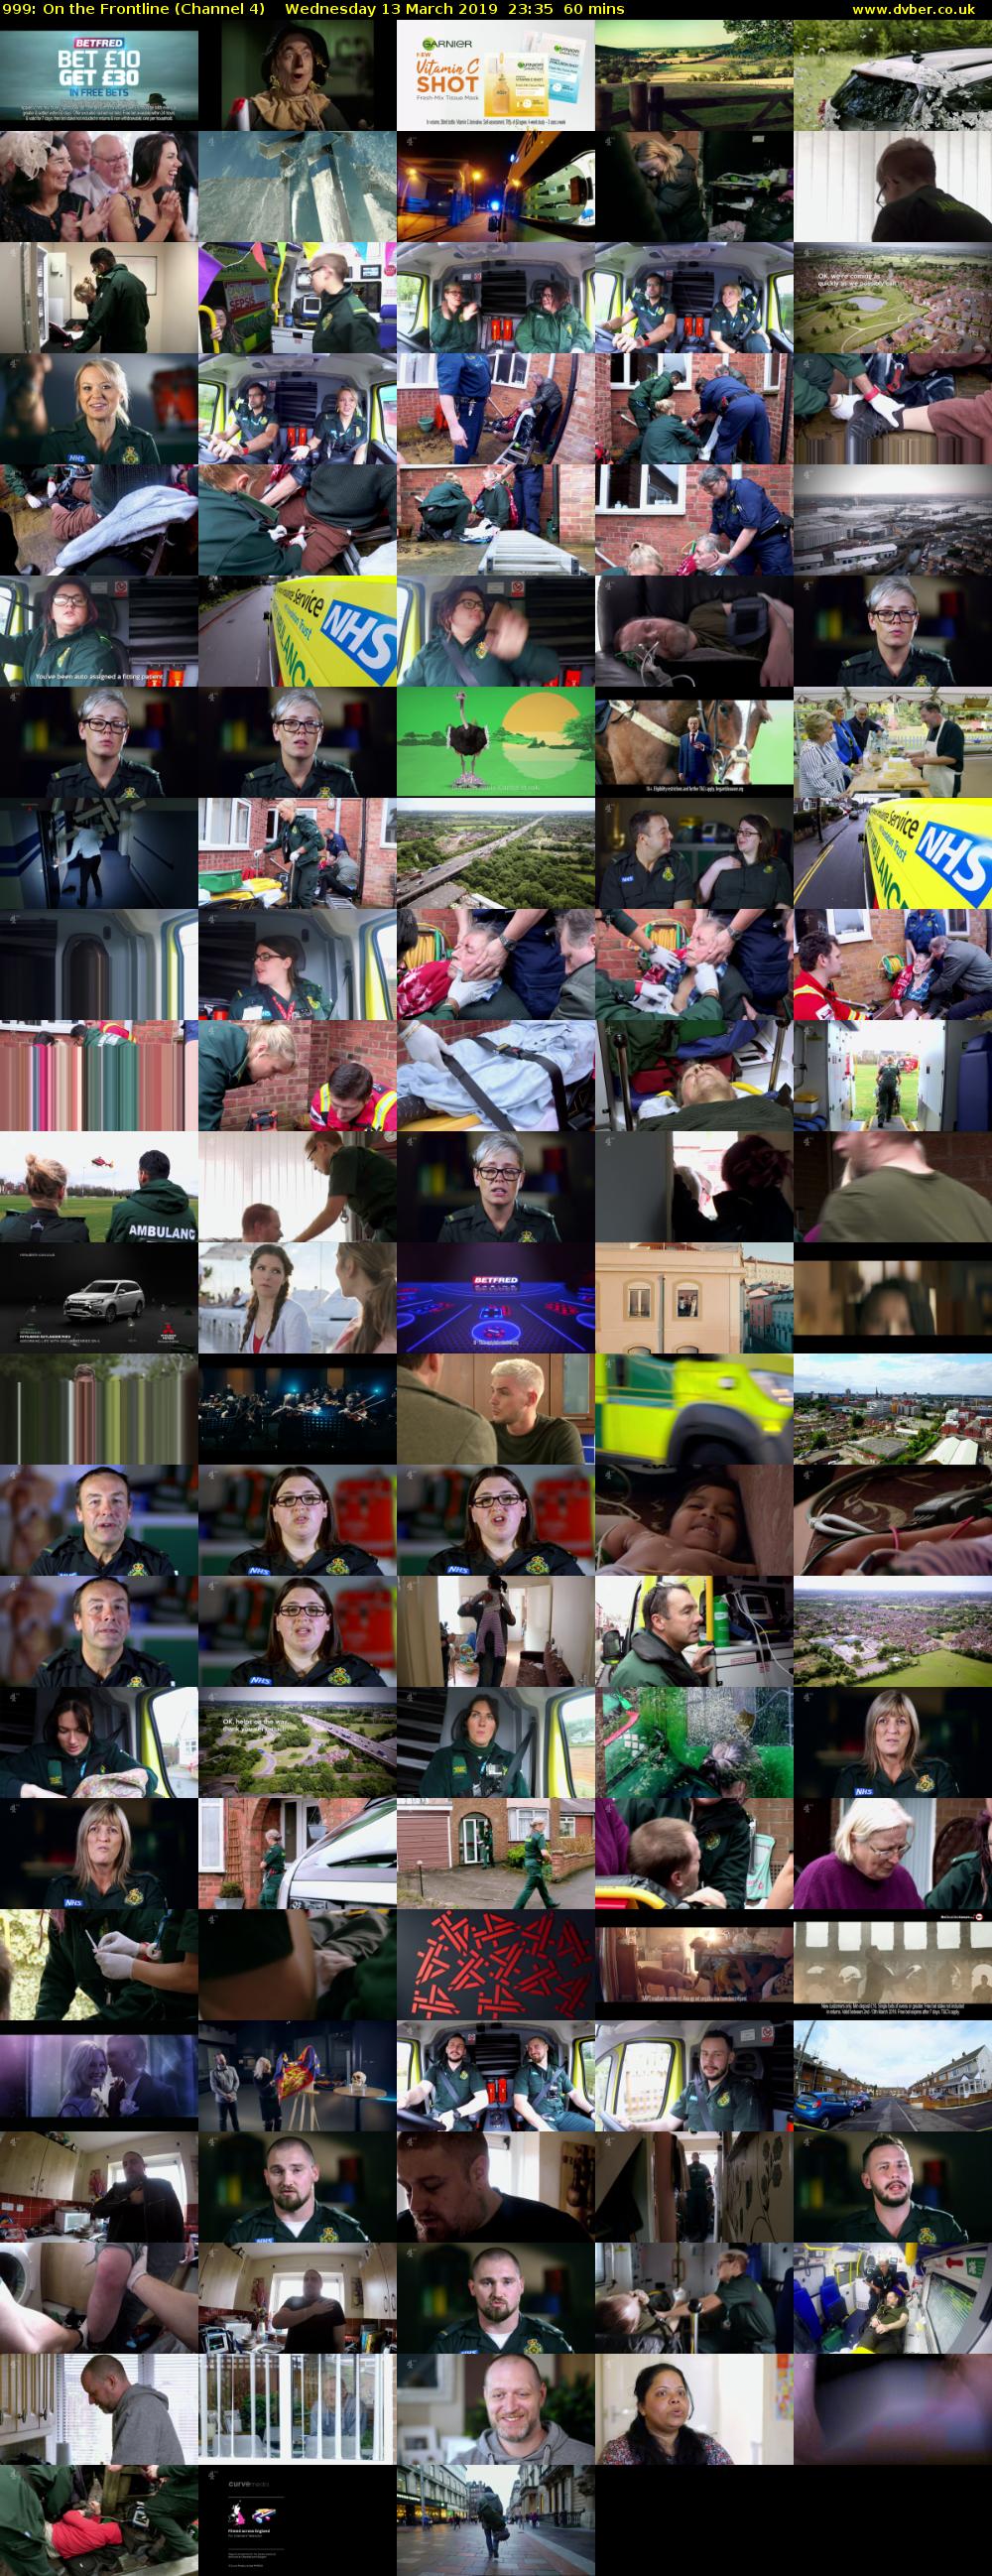 999: On the Frontline (Channel 4) Wednesday 13 March 2019 23:35 - 00:35